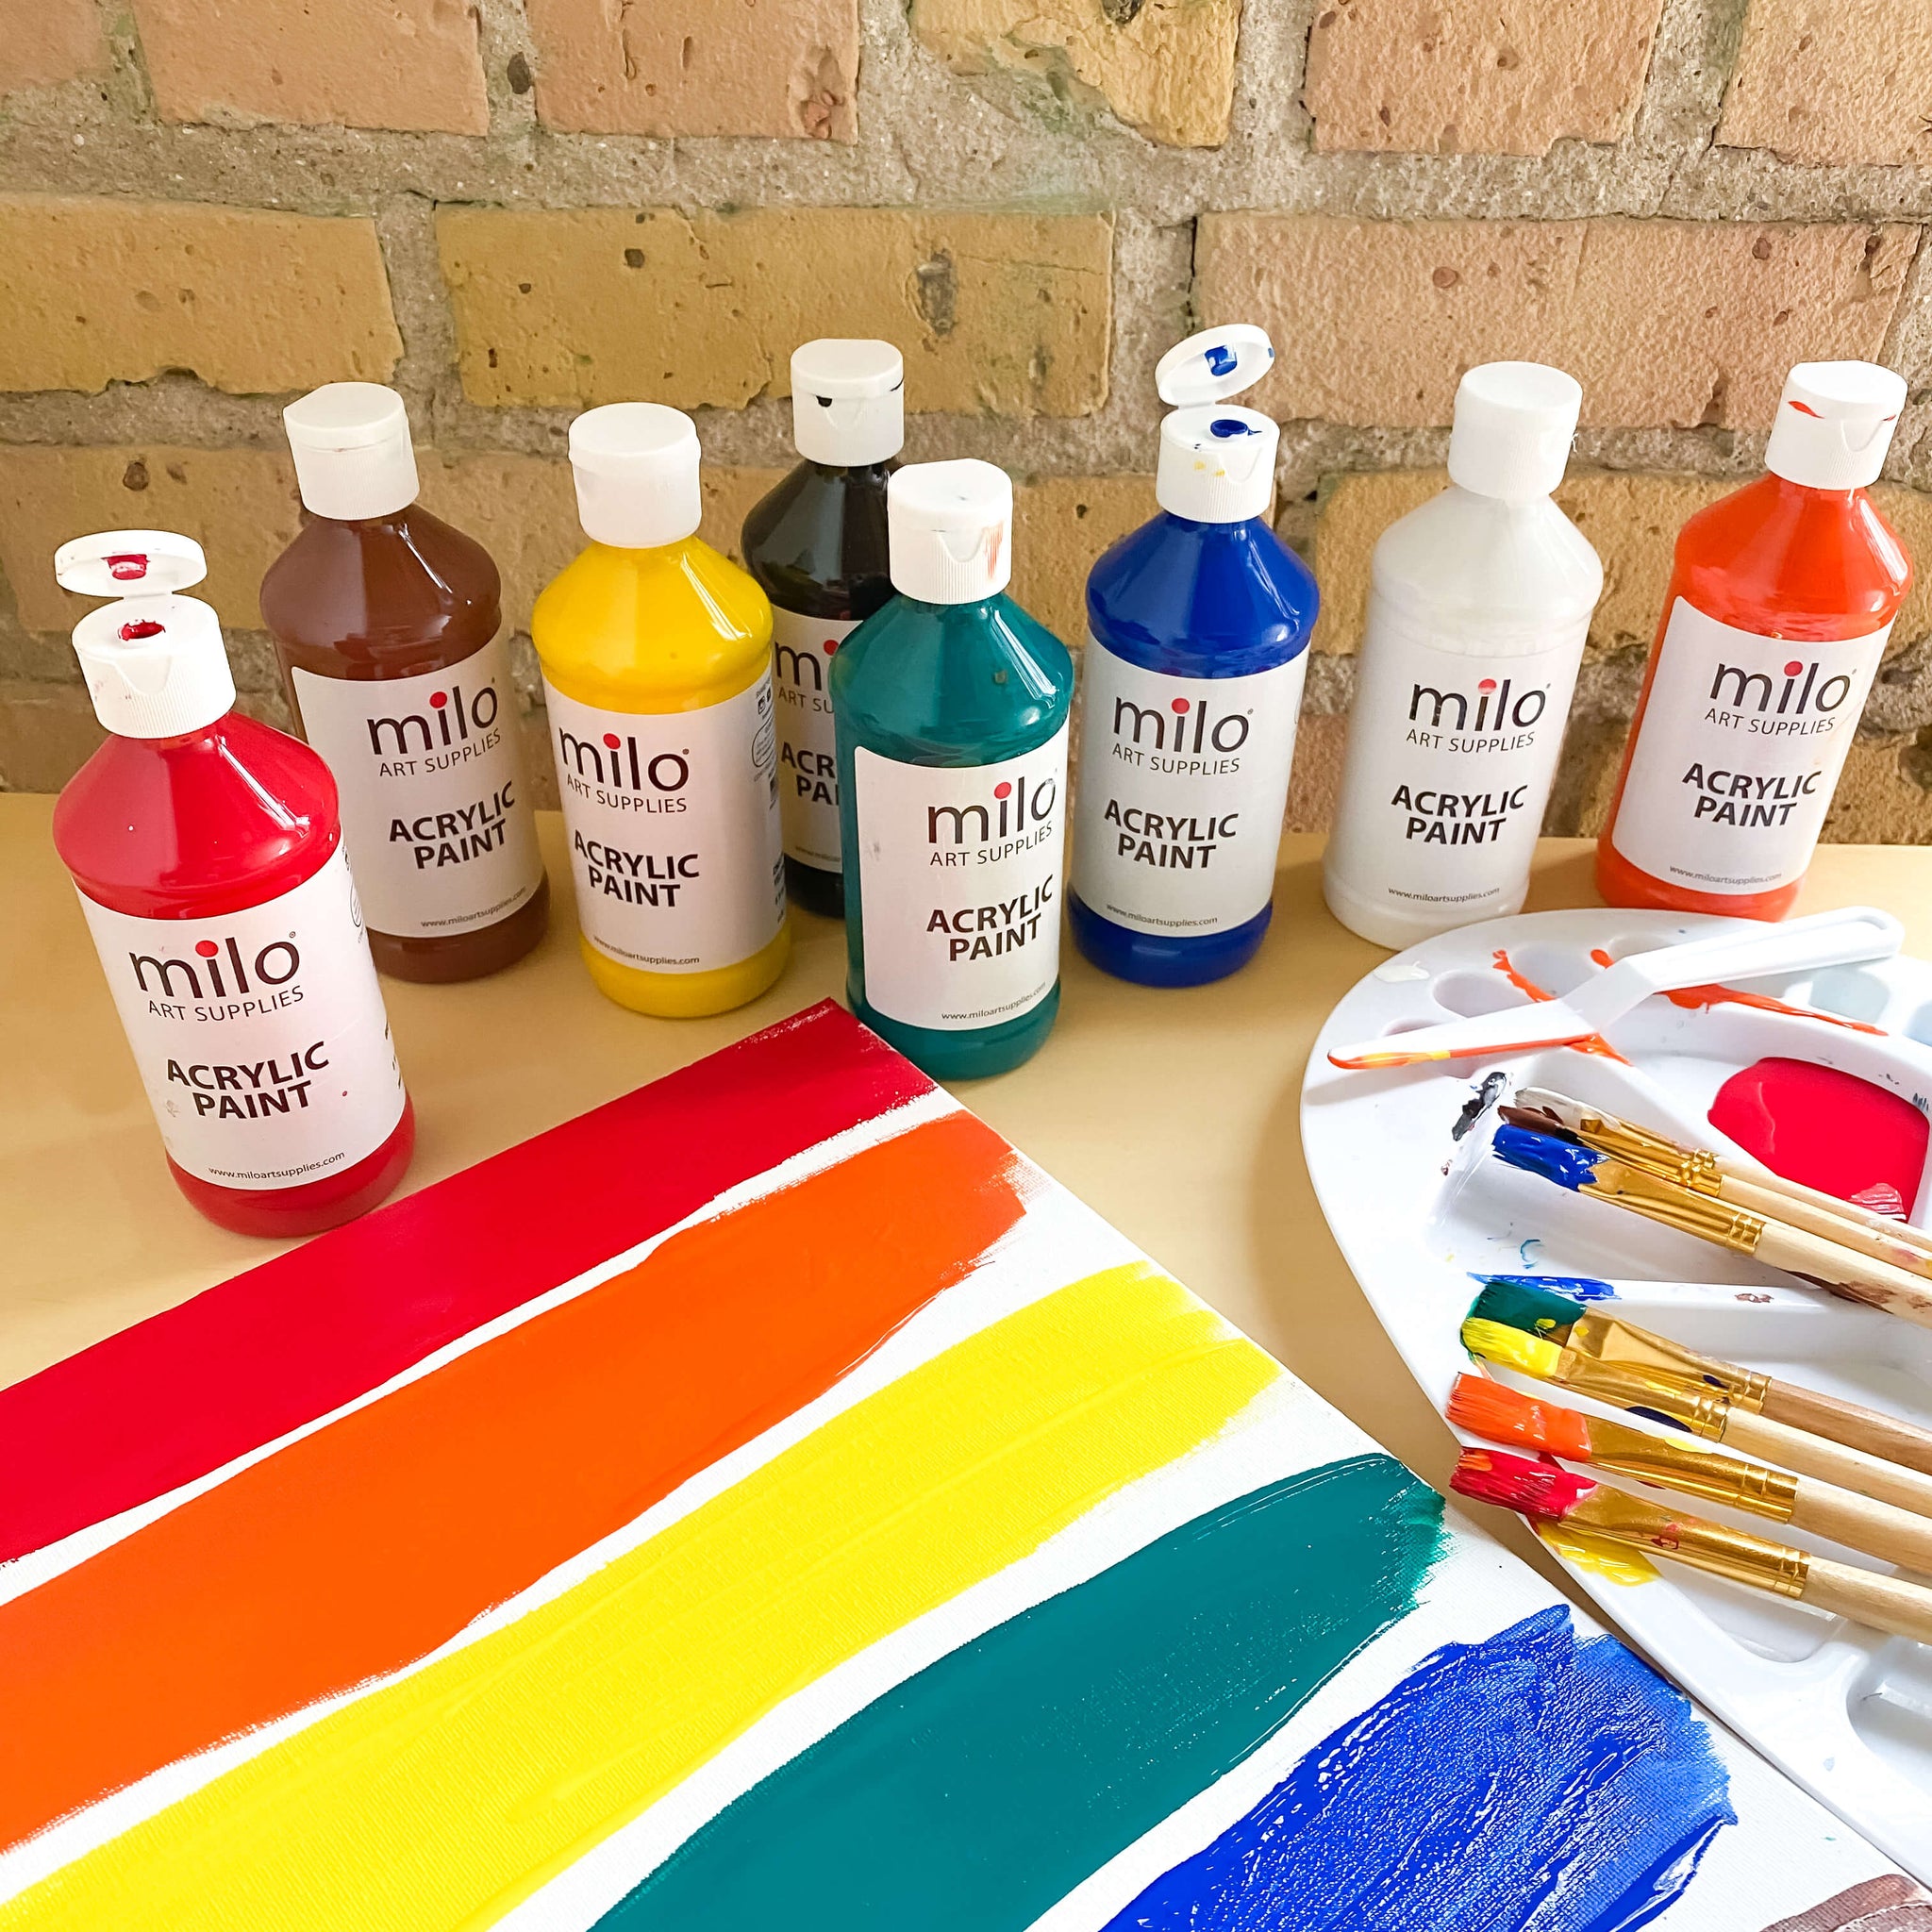  milo Kid's Washable Finger Paint Set of 8 Colors, 8 oz Bottles, Safe and Non-Toxic, Made in the USA